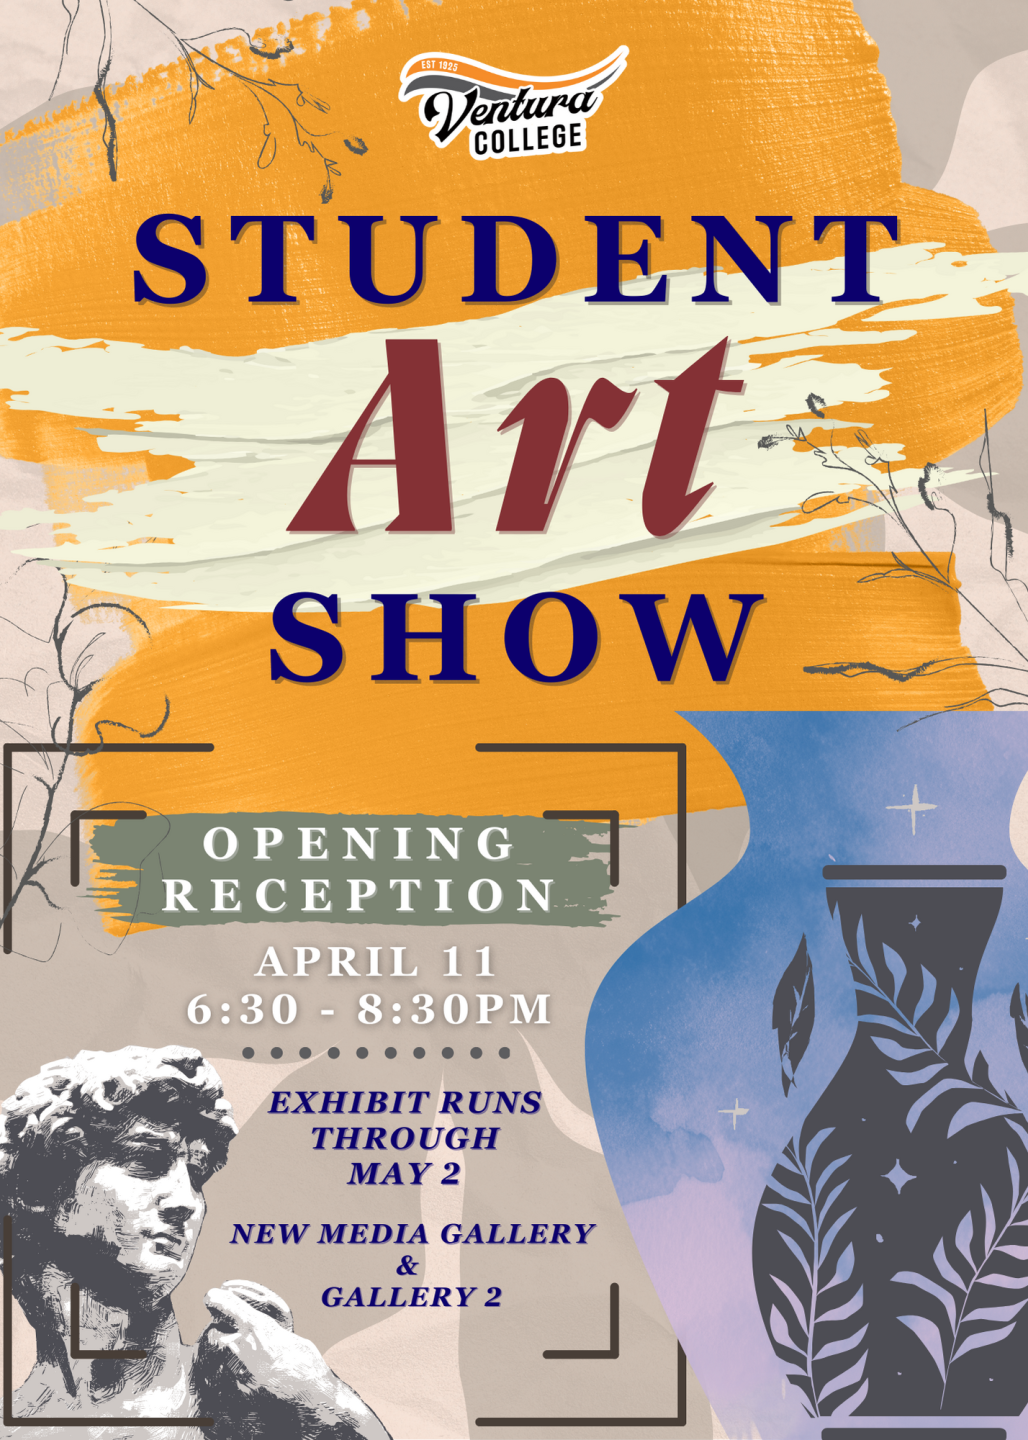 Student Art Show. Opening reception April 11 from 6:30pm to 8:30pm. Exhibit runs through May 2. New Media Gallery and Gallery 2.